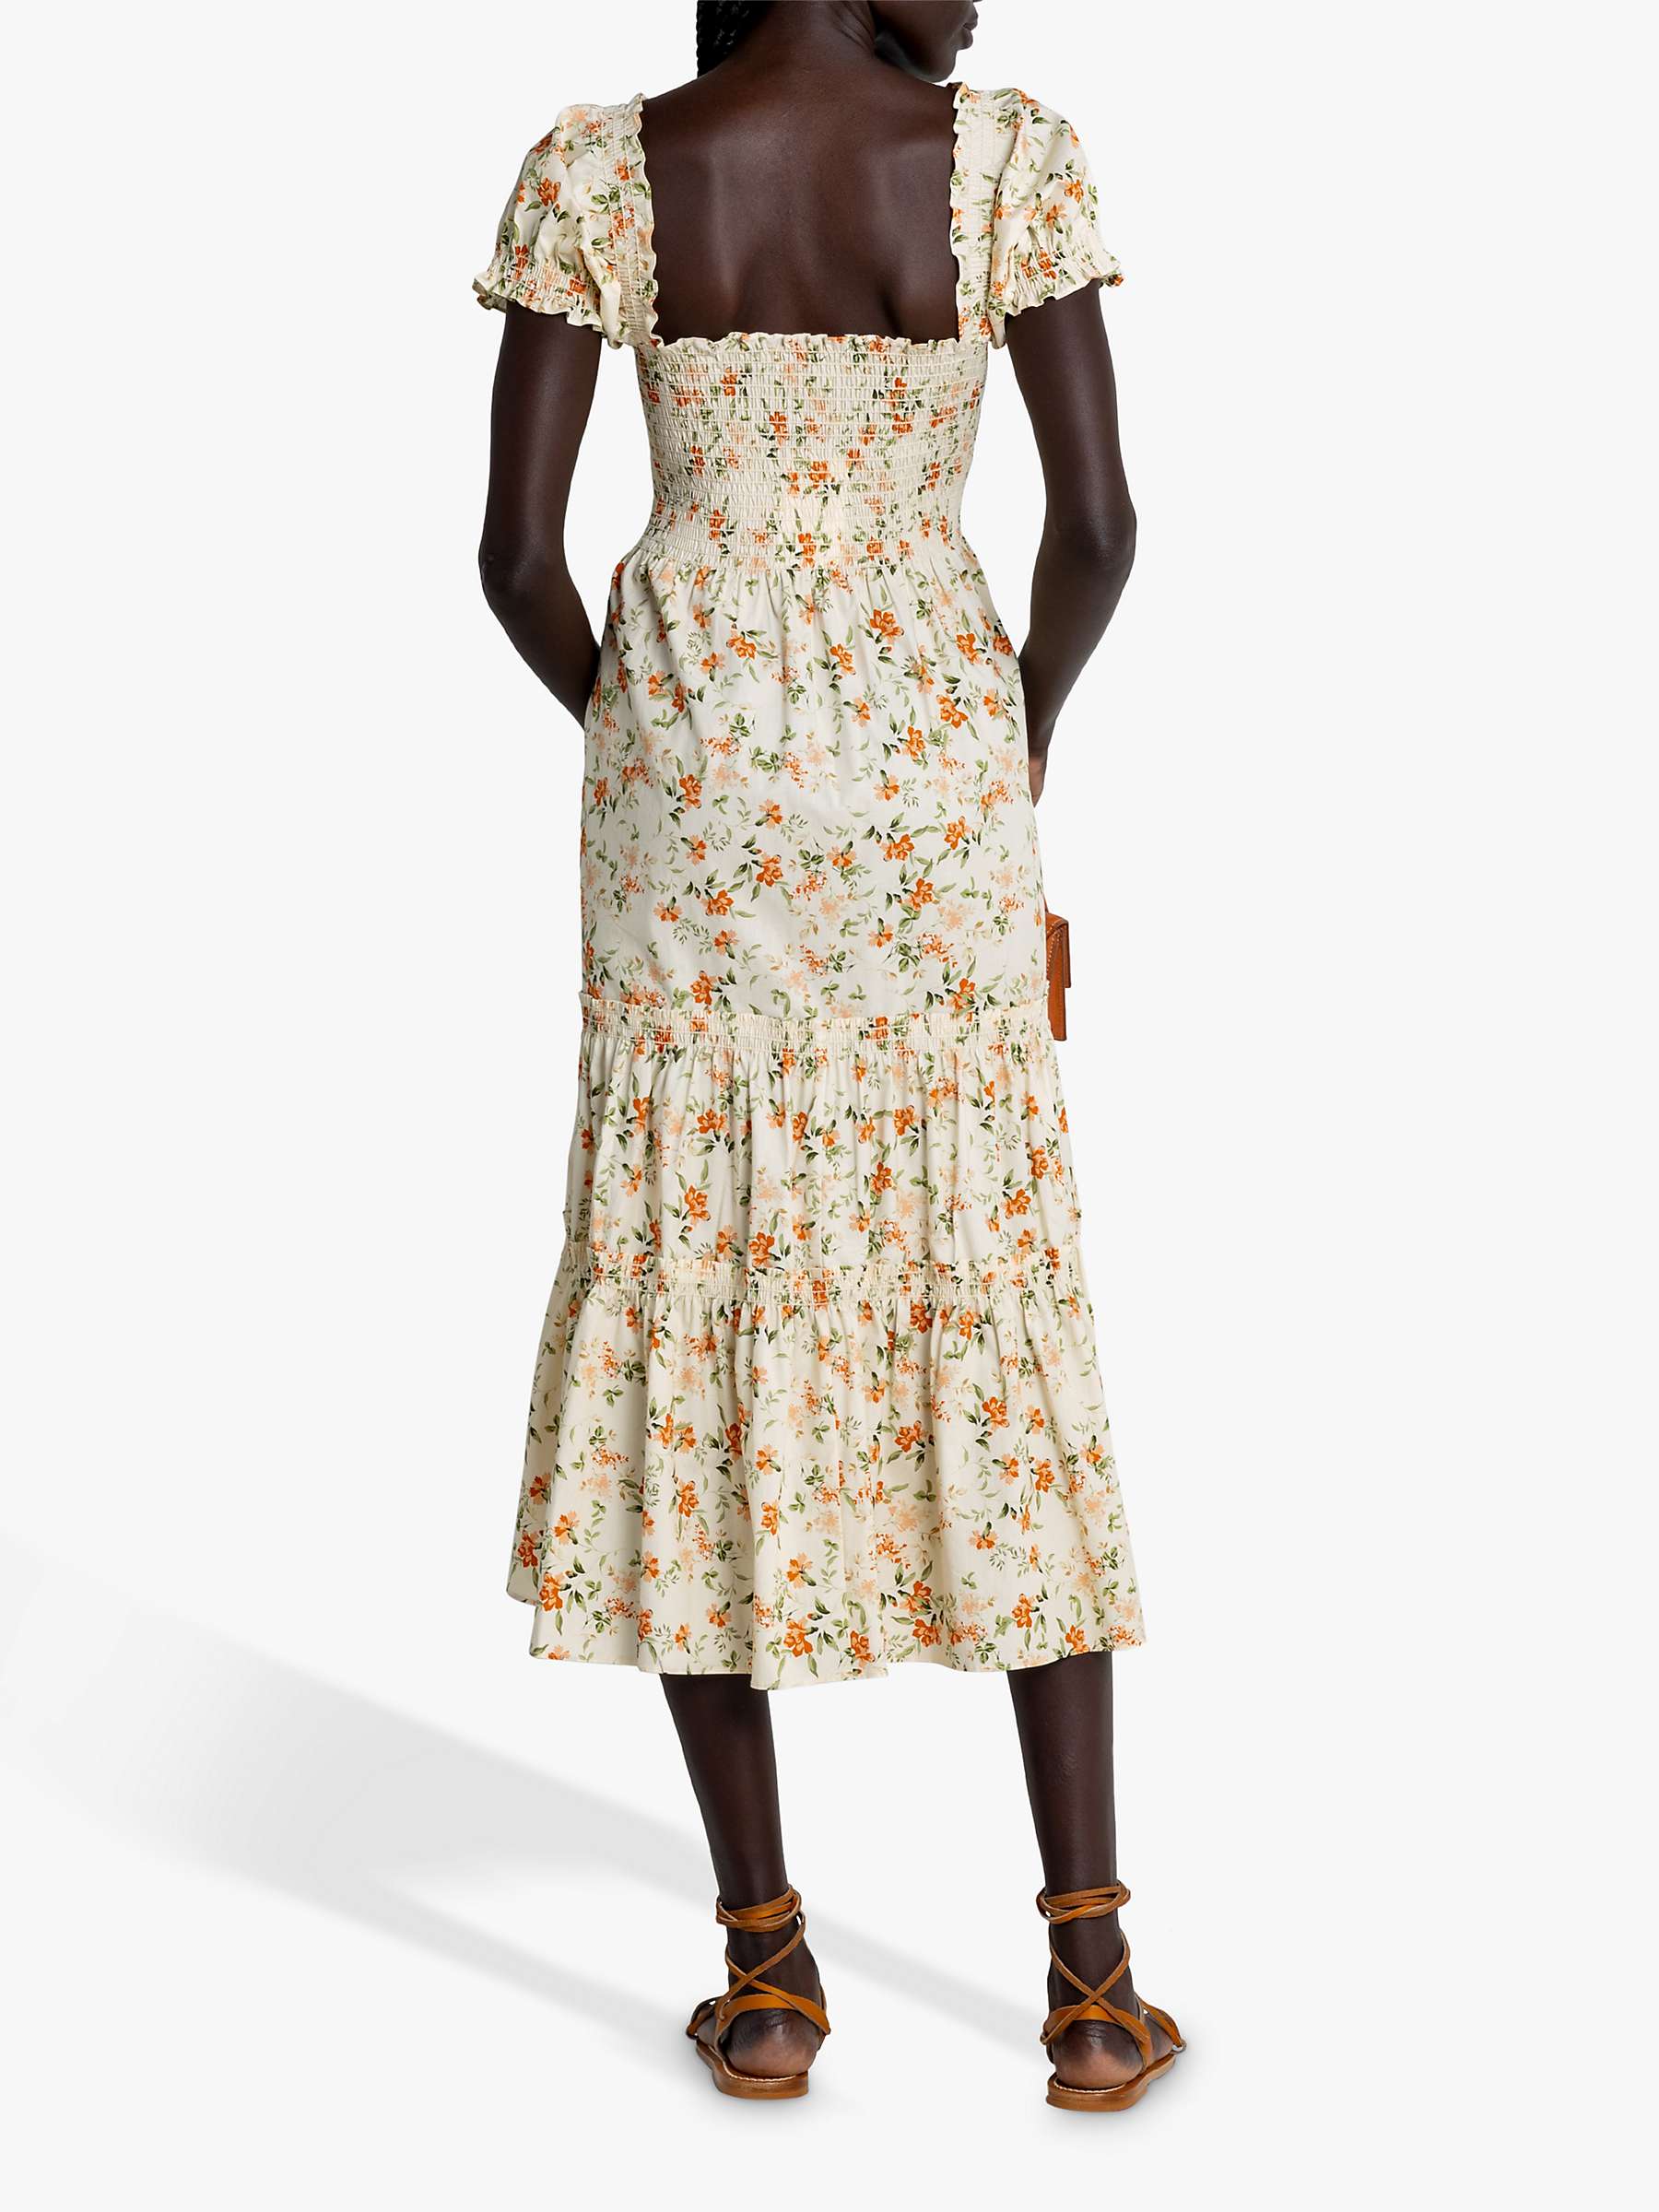 Buy o.p.t Daphne Floral Print Tiered Midi Dress, Yellow/Multi Online at johnlewis.com